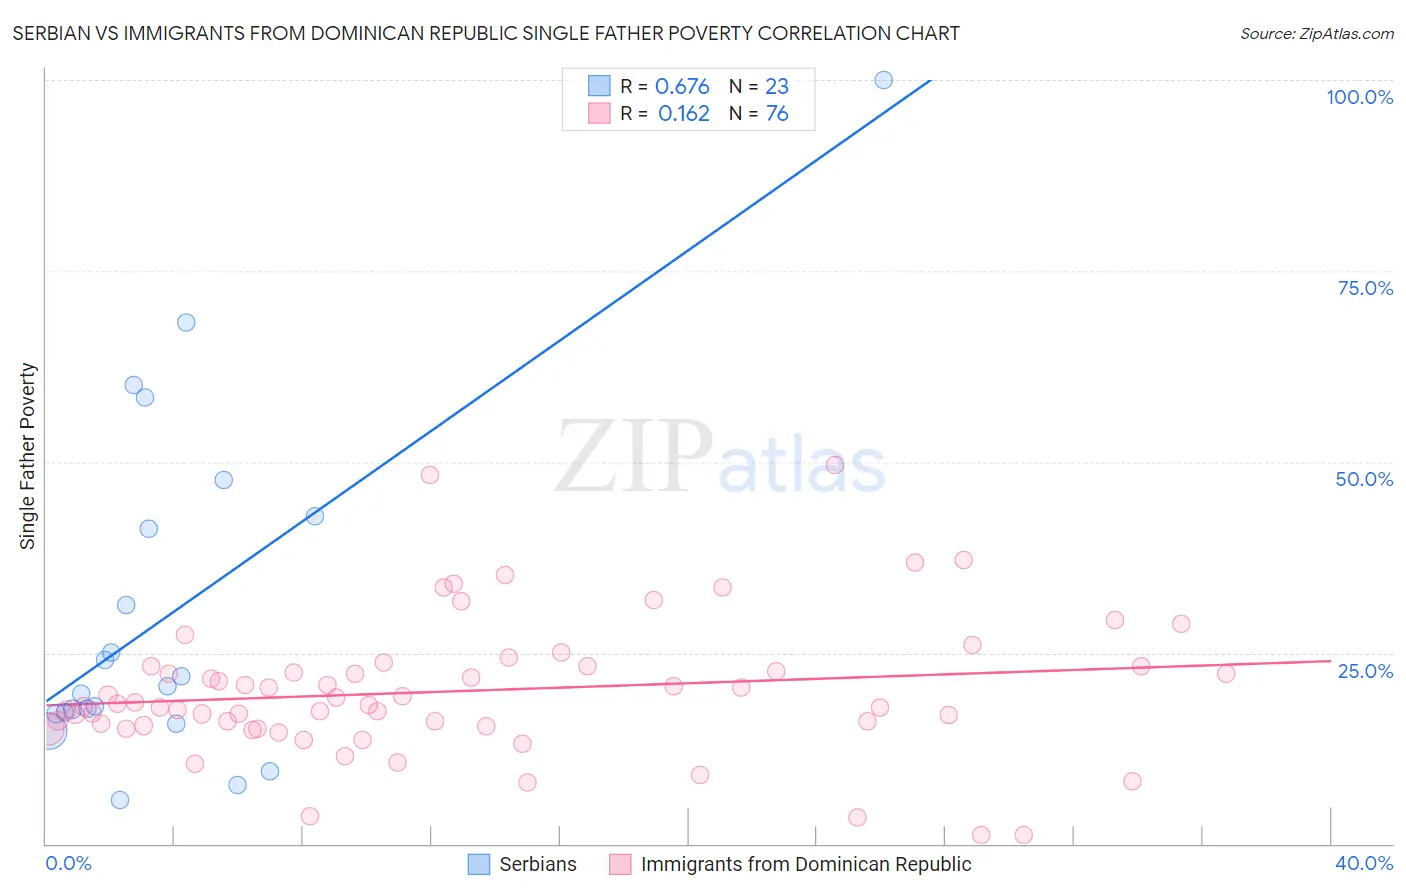 Serbian vs Immigrants from Dominican Republic Single Father Poverty